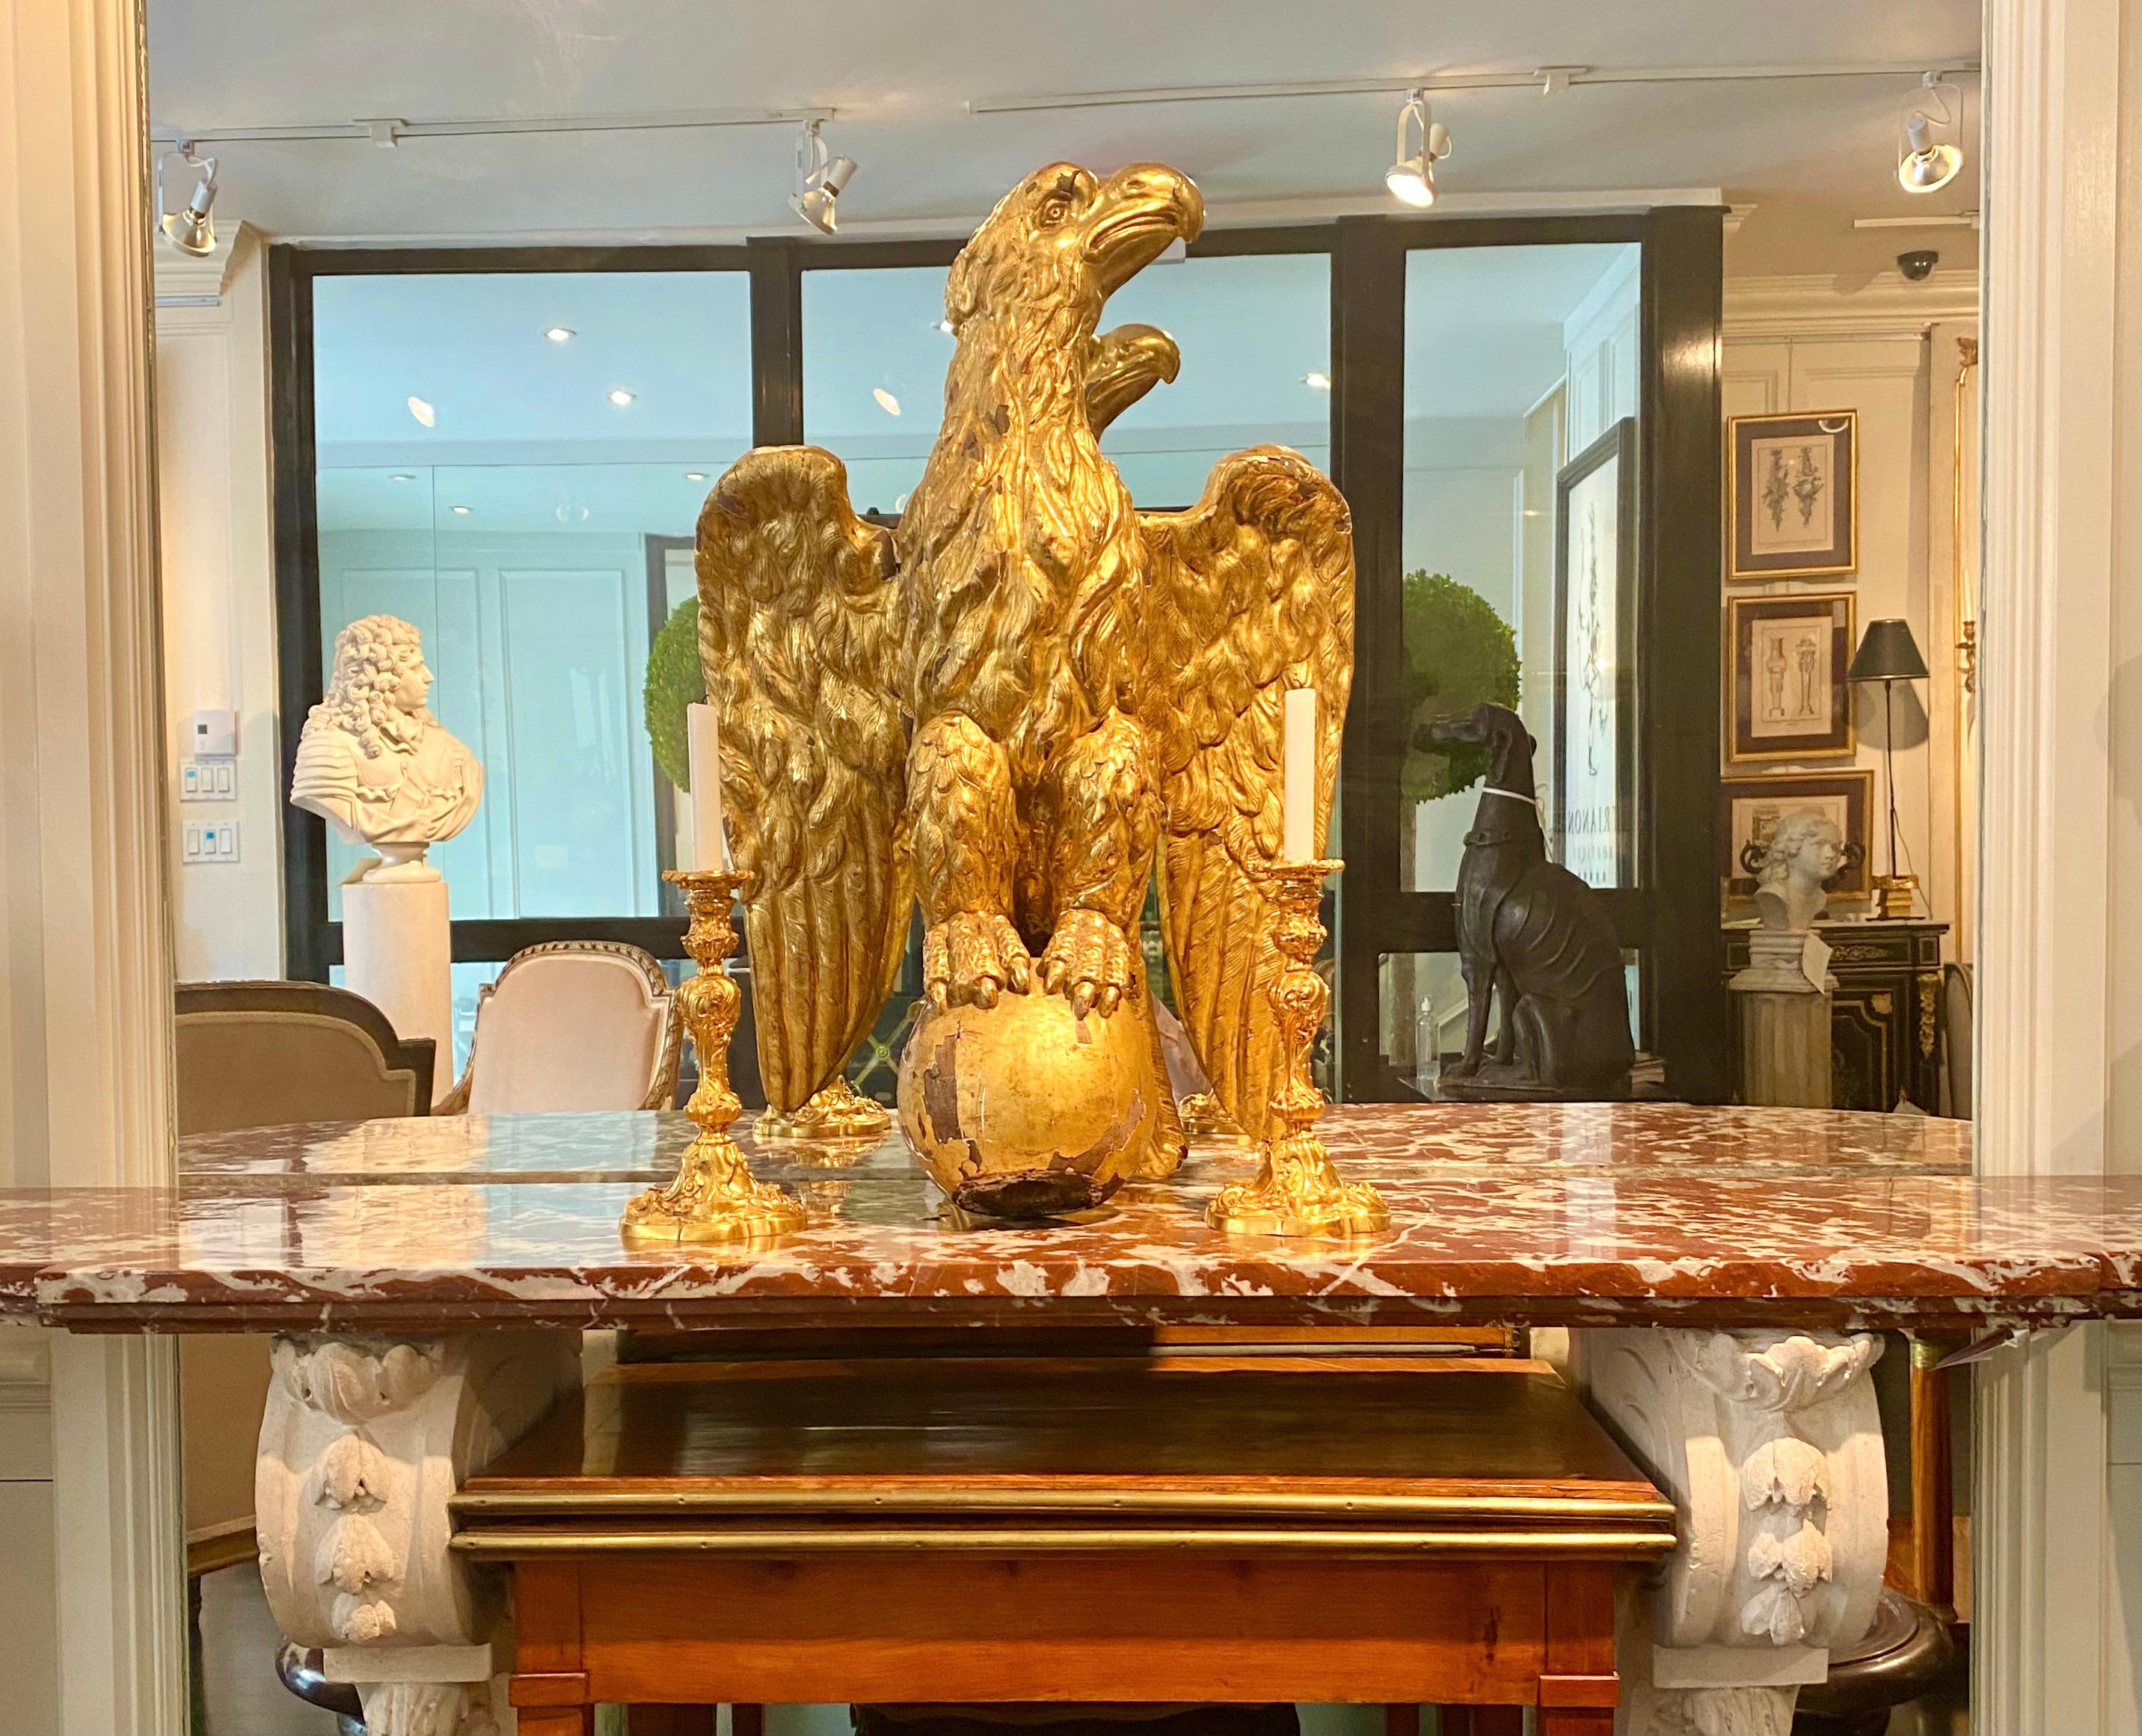 Rare French, 19th century, Empire. Large size carved wood and gesso gilt eagle, with its full body, swept back wings, pronounced talons, perched on a ball. Important size.

Condition good for age, with cracks to gilding with some gesso and wood